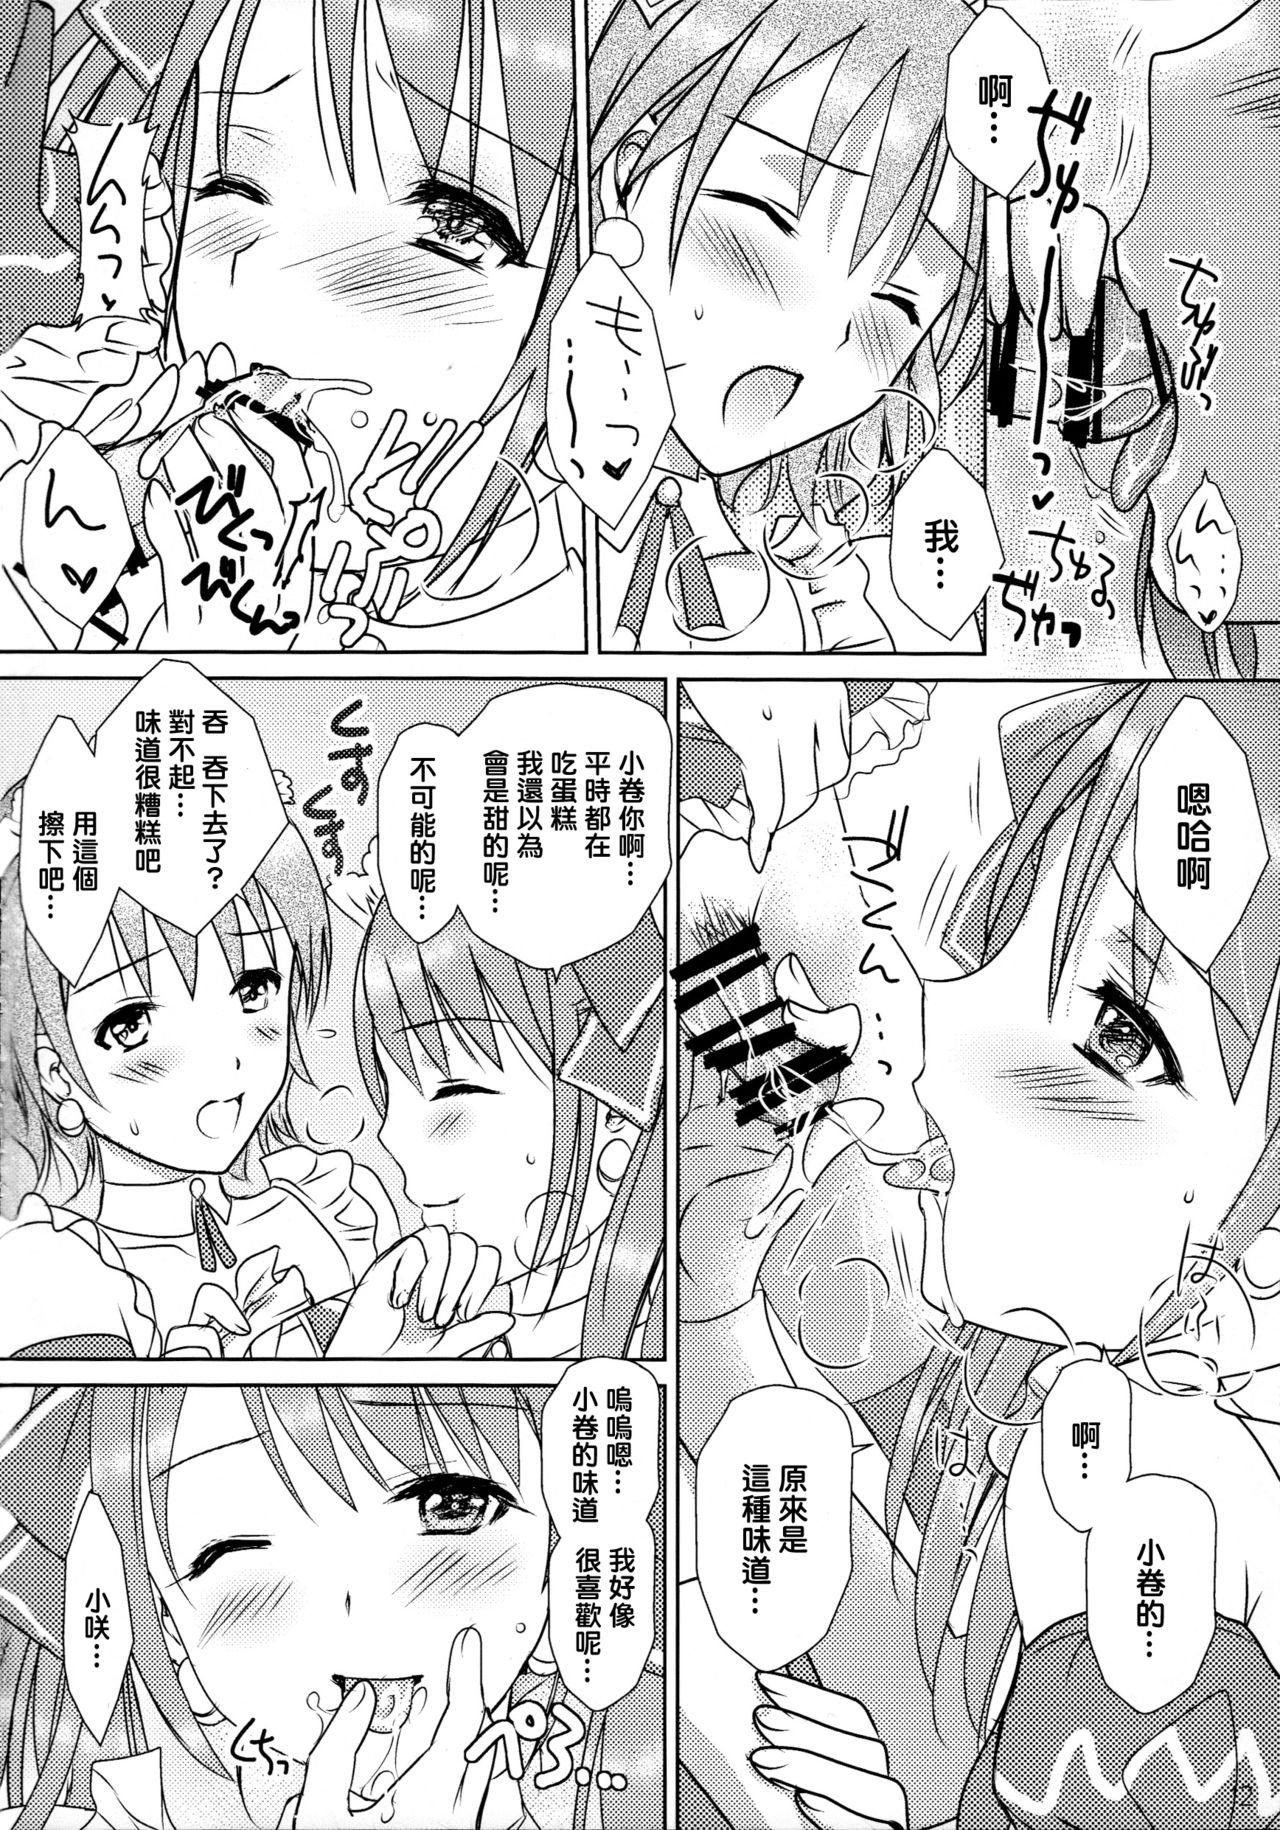 Riding You're my special sweetest cake! - The idolmaster Teenfuns - Page 12